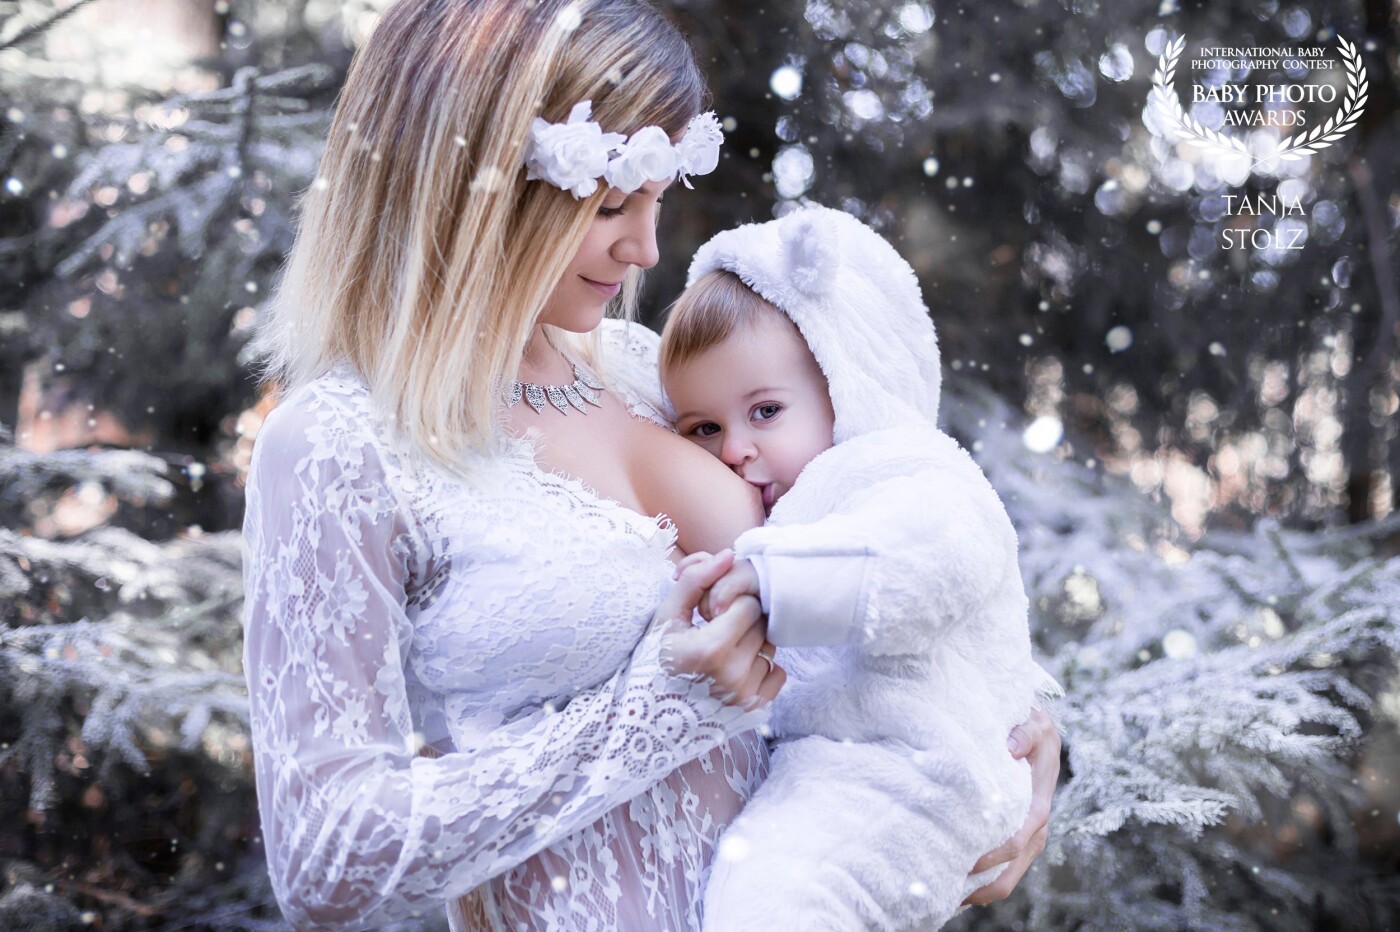 As Austria's leading breastfeeding photographer, I always look out for THIS very special and magical moment between a loving mother and her child. I try to capture their most beautiful and intimate pose in gorgeous outfits and even more stunning surroundings. But for this winter-shot, we had to improvise a little bit. Because with no snow on our shooting-day, I had to use snow-spray to cover up some branches and add a few snowflakes in post-production. I'm pretty happy with the final outcome. This lovely picture turned out to become my very first cinemagraph too. Check out my Youtube channel to view all the magic! https://www.youtube.com/watch?v=VFNc72oFnoM<br />
